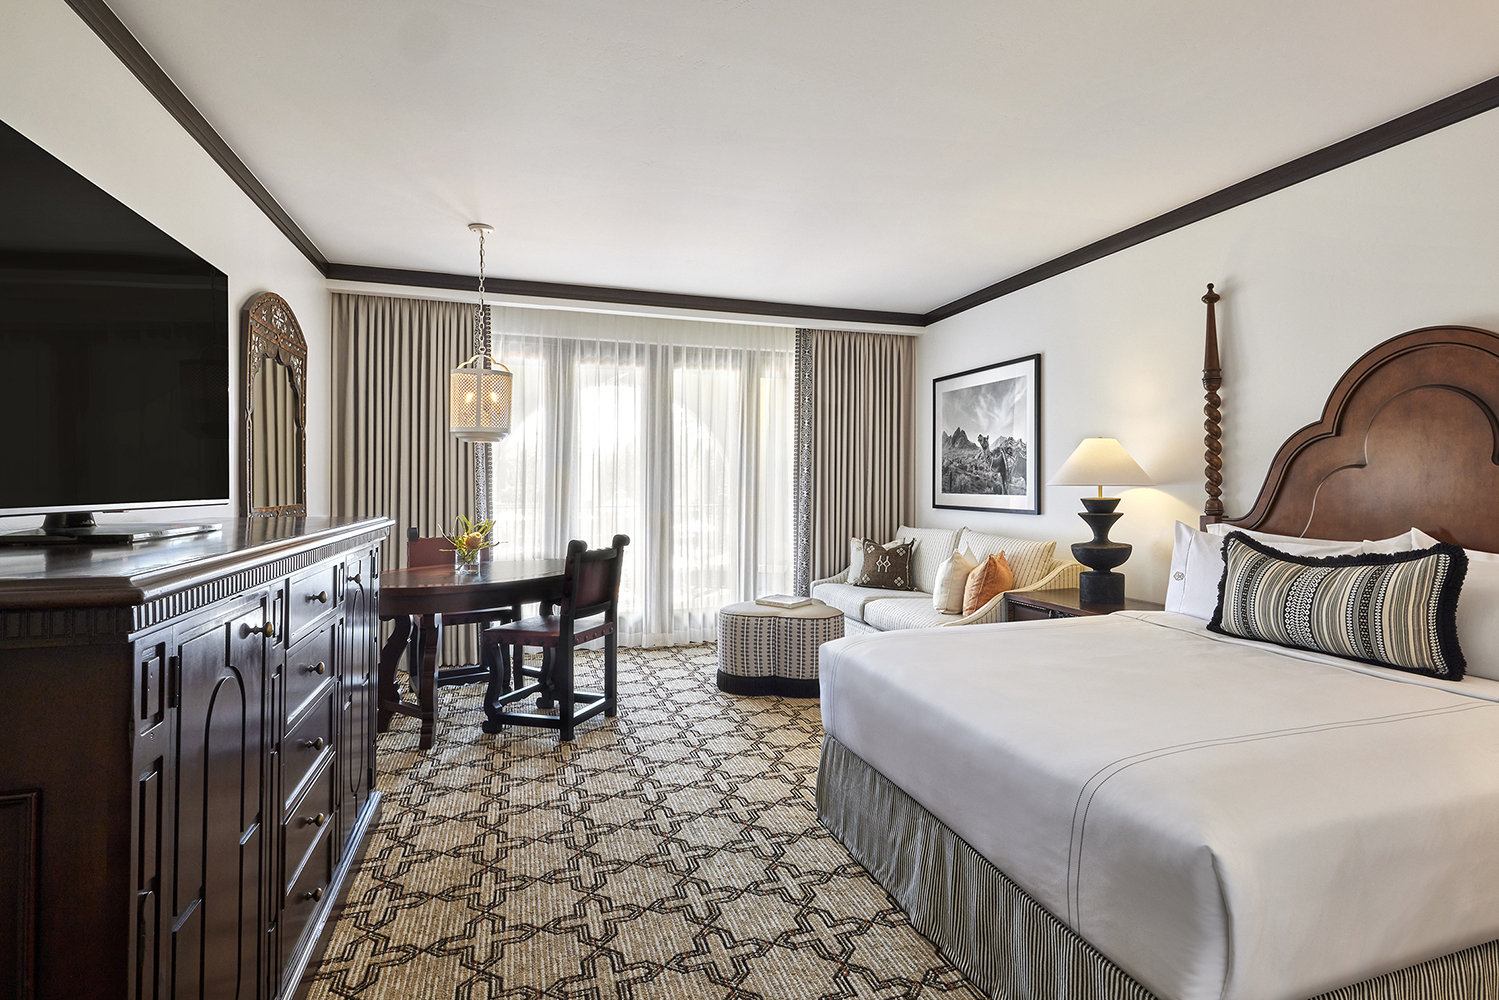 The phased renovation will begin with the resorts 293 guestrooms and 38 suites